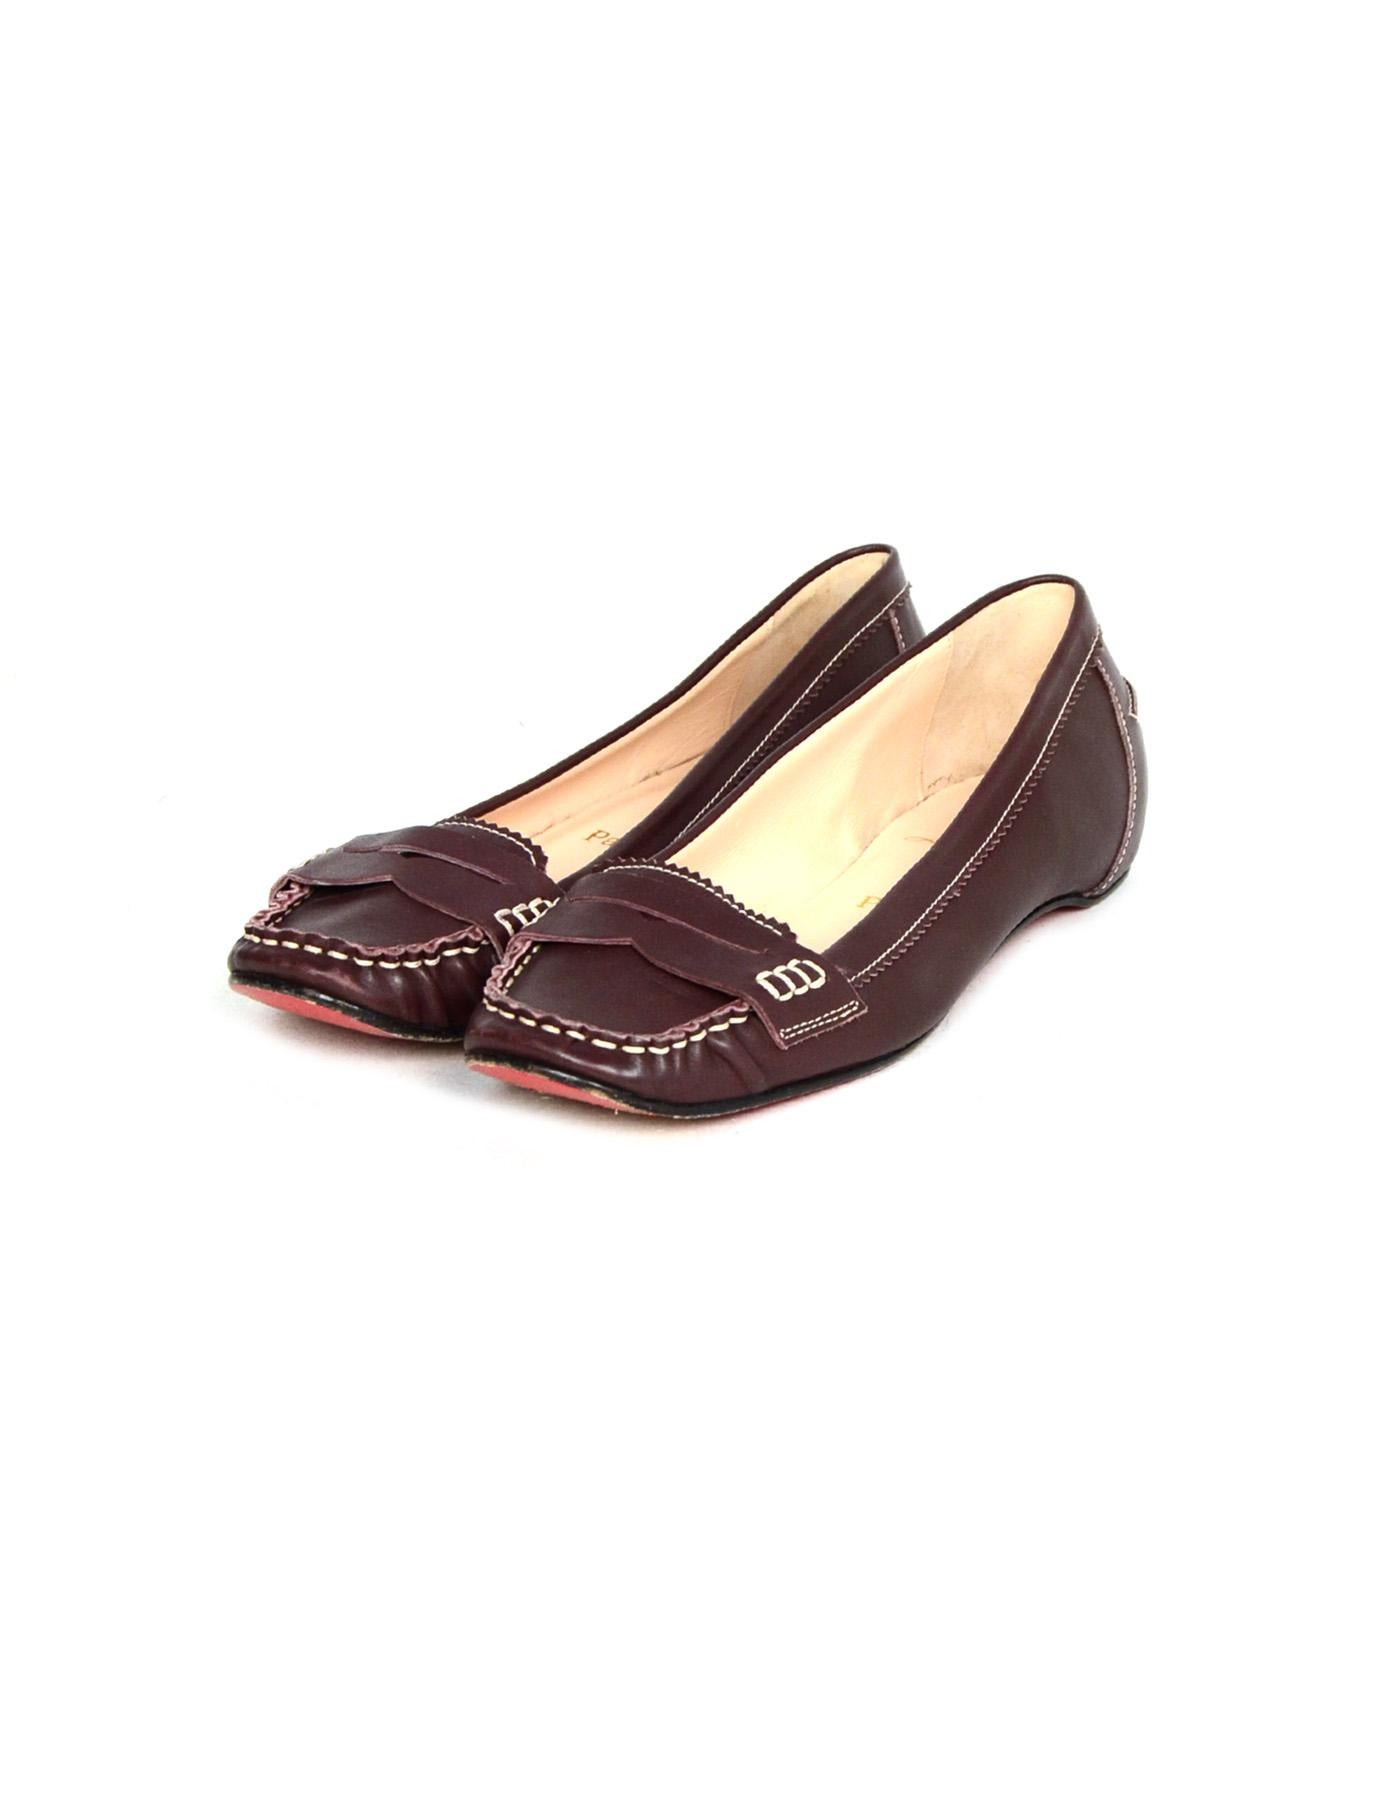 Christian Louboutin Brown Leather Loafers Sz 38

Made In: Italy
Color: Brown
Materials: Leather
Closure/Opening: Slide on
Overall Condition: Very good pre-owned condition with exception of some scuffing on back of heels and bottom of toes.

Marked